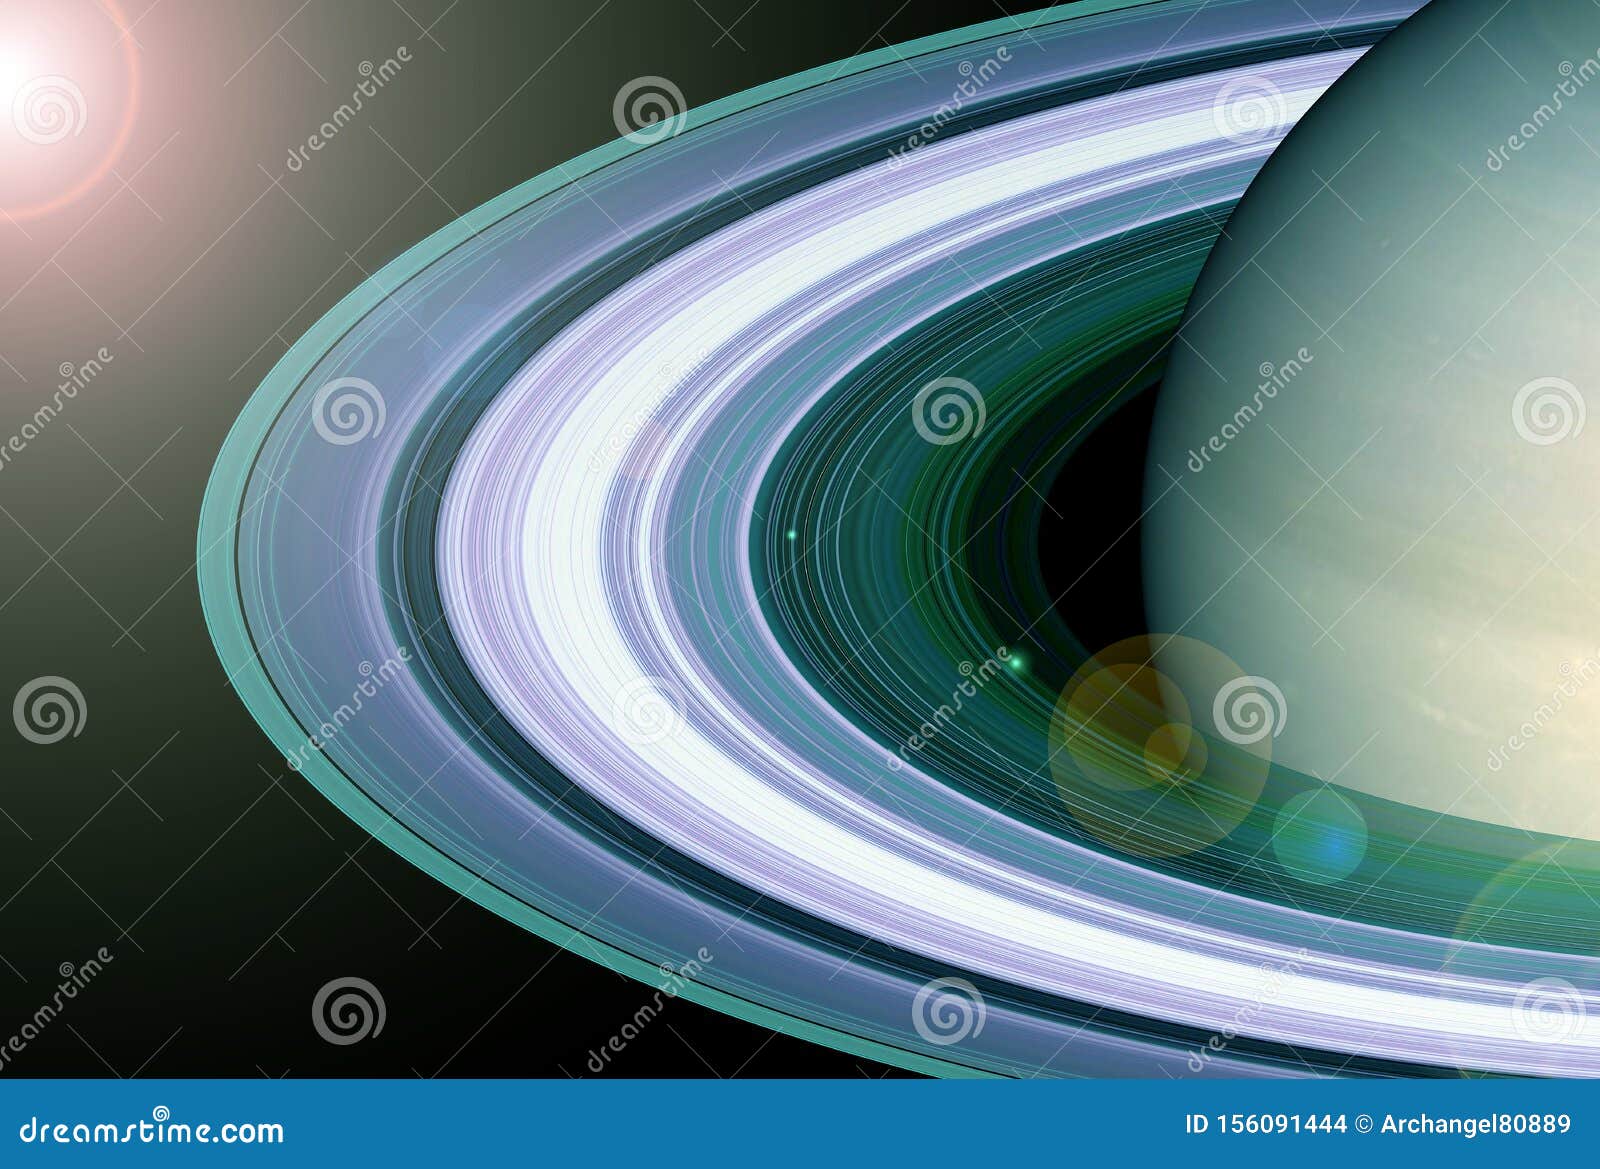 Saturn's Rings May Have Formed Relatively Recently, Scientists Say : NPR